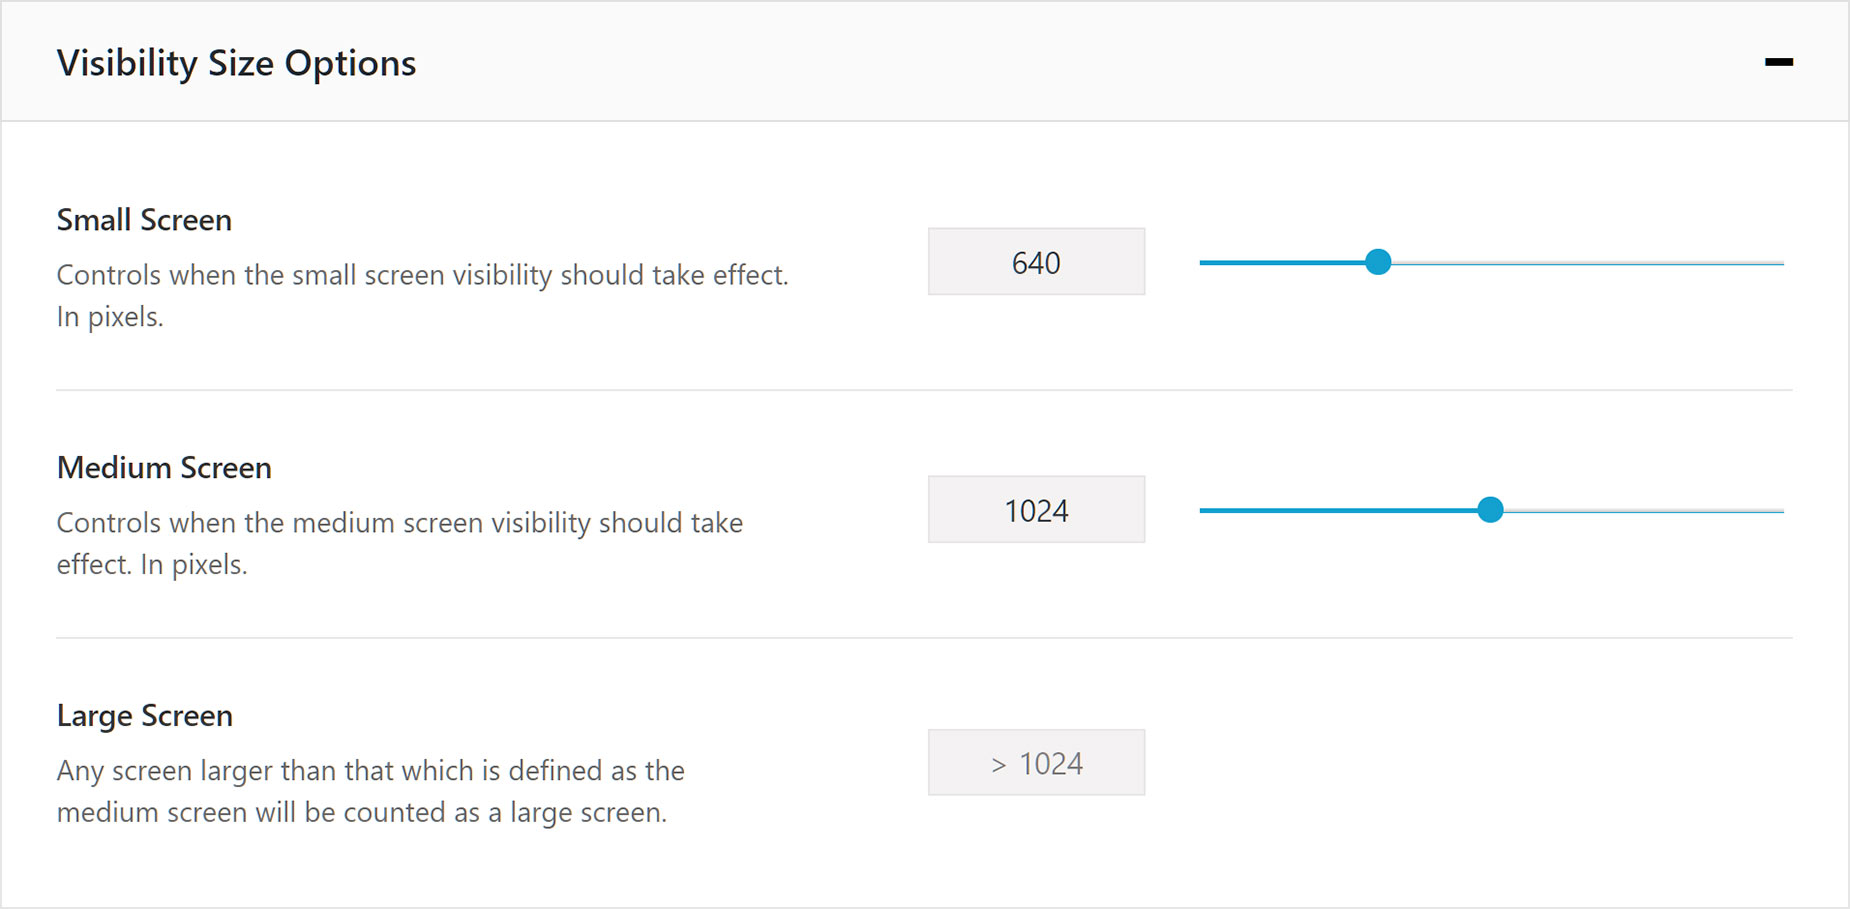 Visibility Size Options